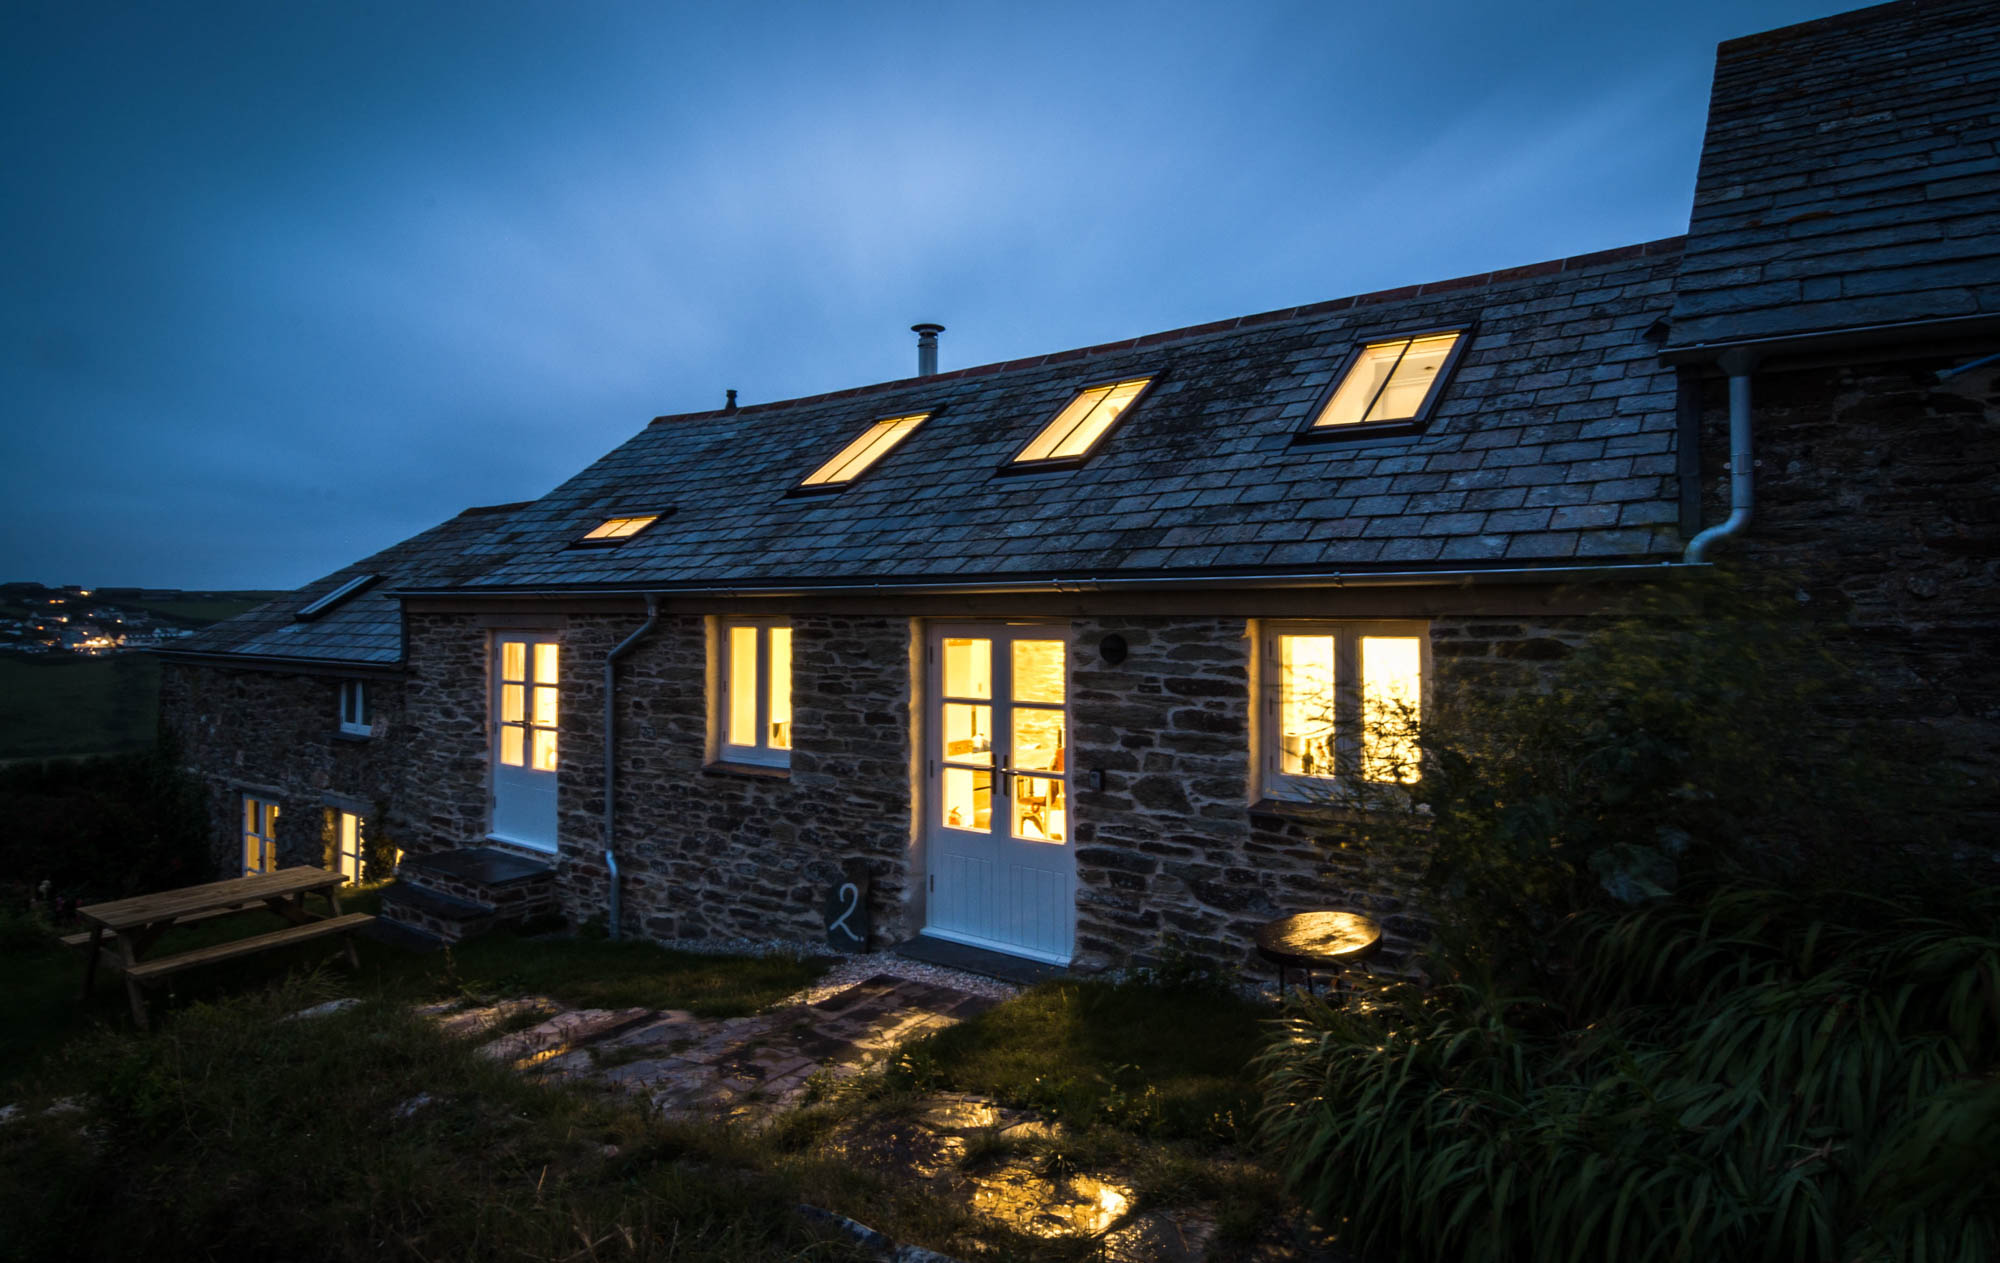 Exterior view of the cottage facade at night showing the new windows.